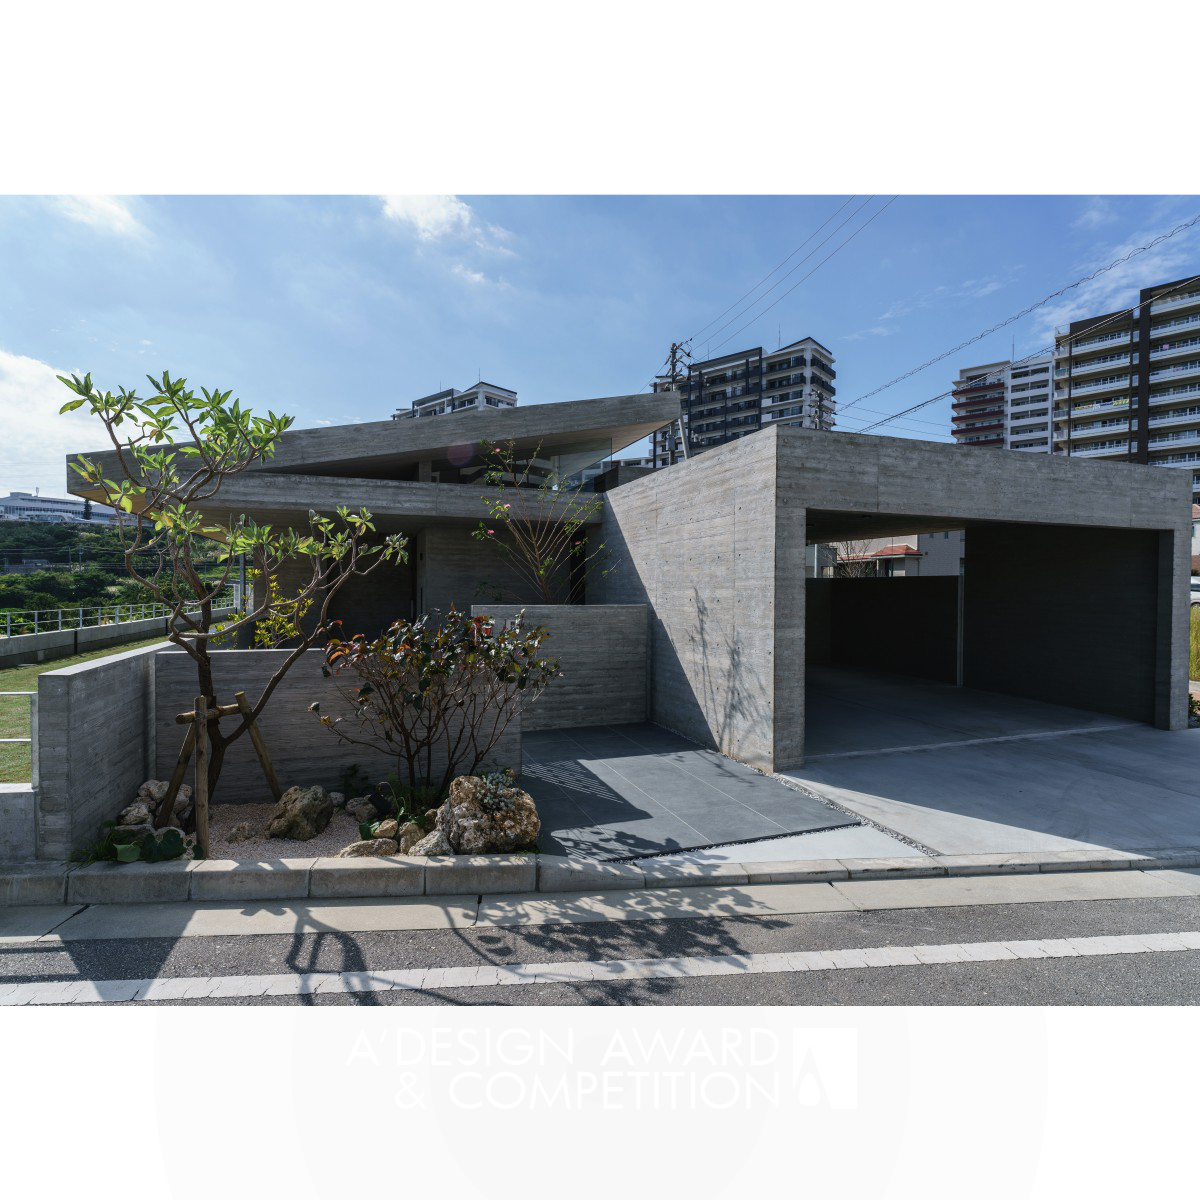 Masashi Nakamoto wins Silver at the prestigious A' Architecture, Building and Structure Design Award with The Three Roof House.